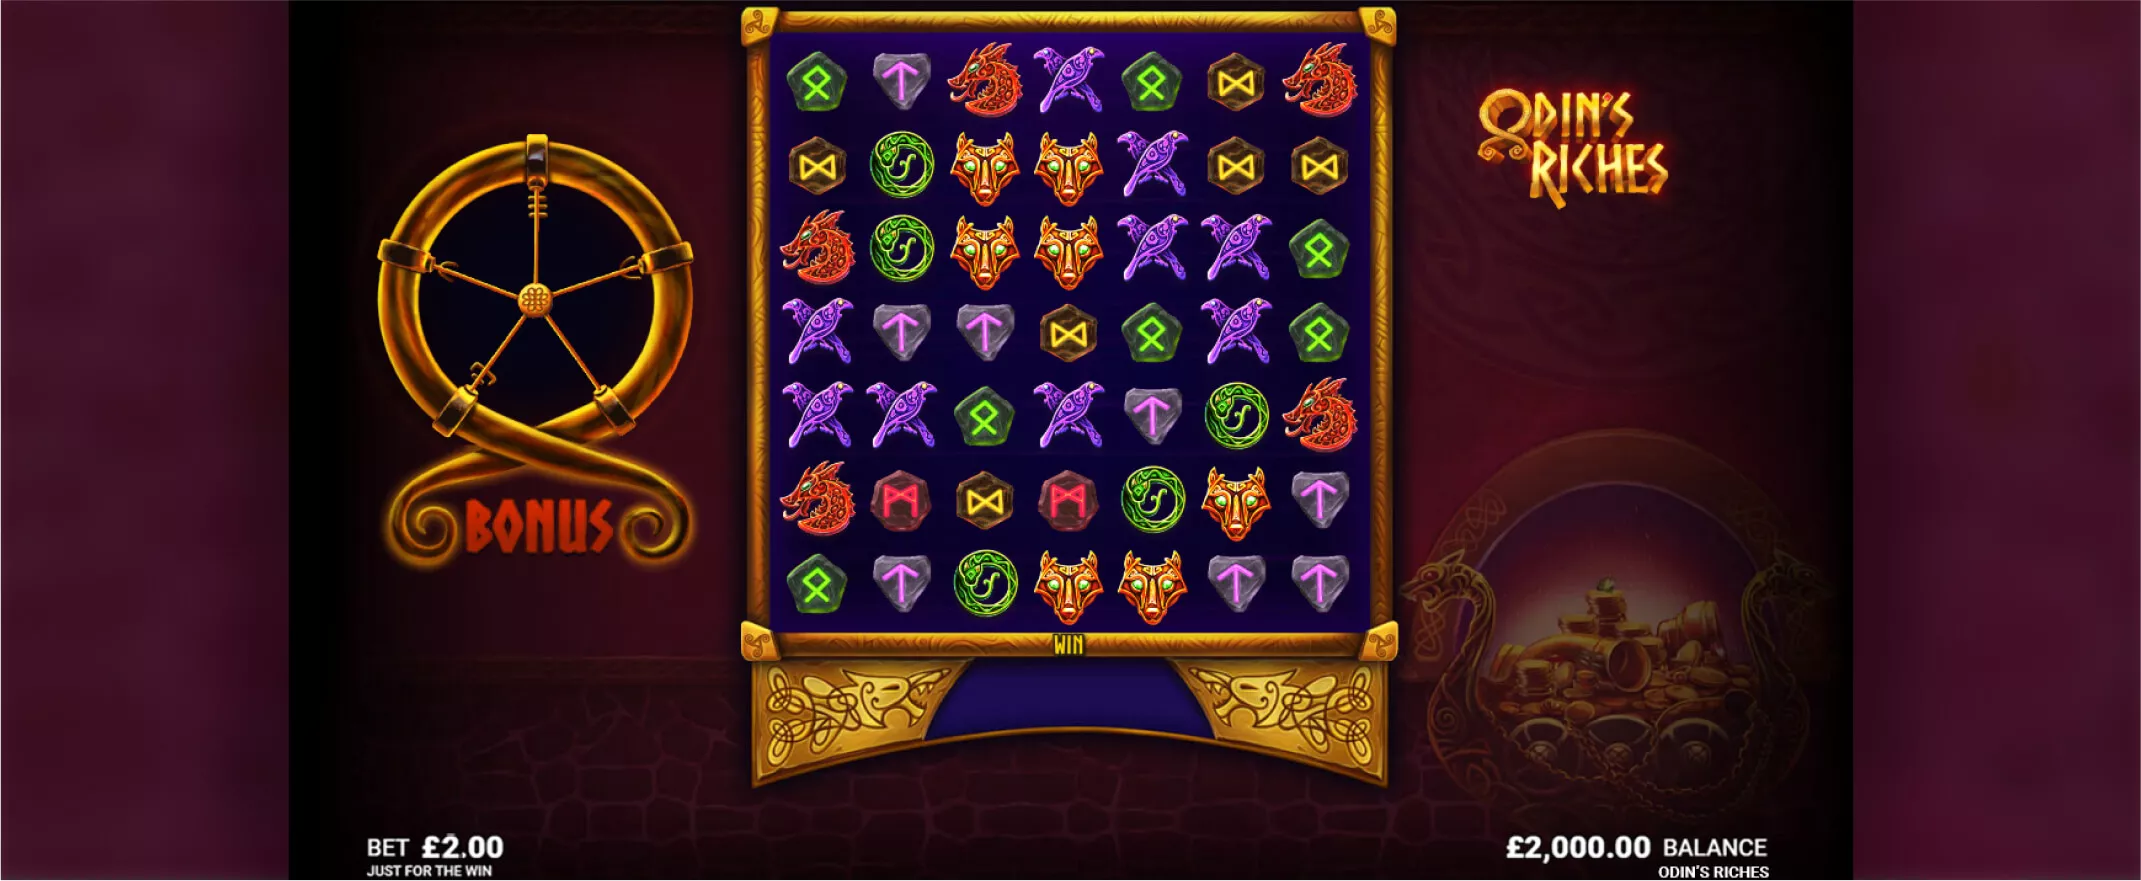 Odin's Riches slot screenshot of the reels